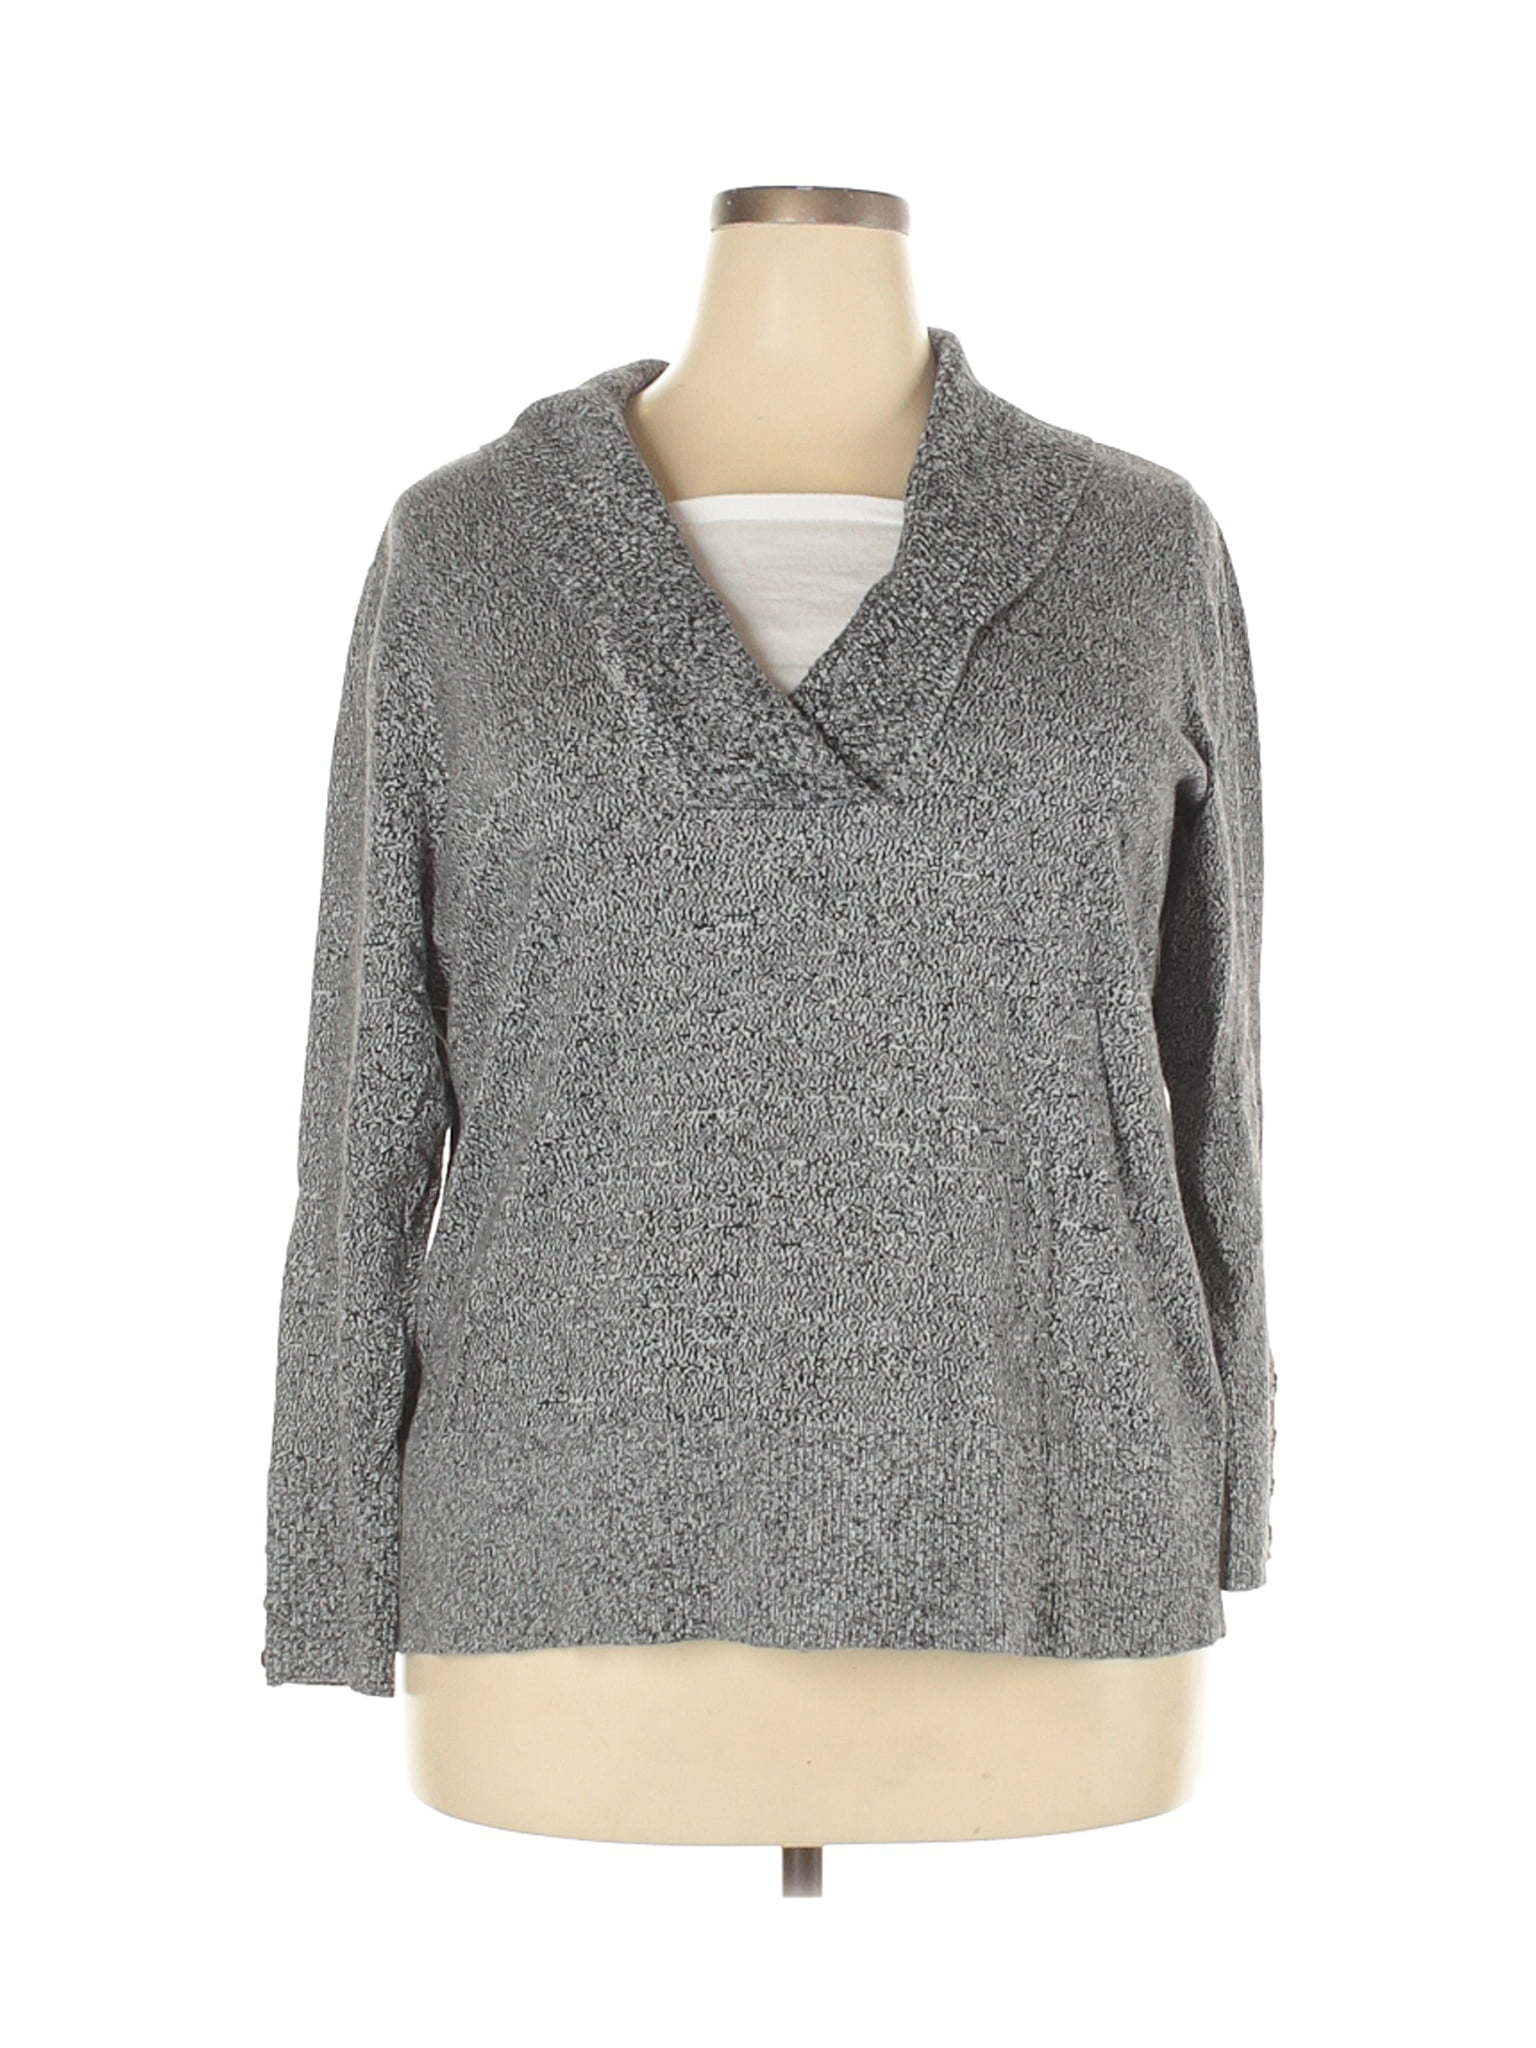 CJ Banks - Pre-Owned Cj Banks Women's Size 2X Plus Pullover Sweater ...